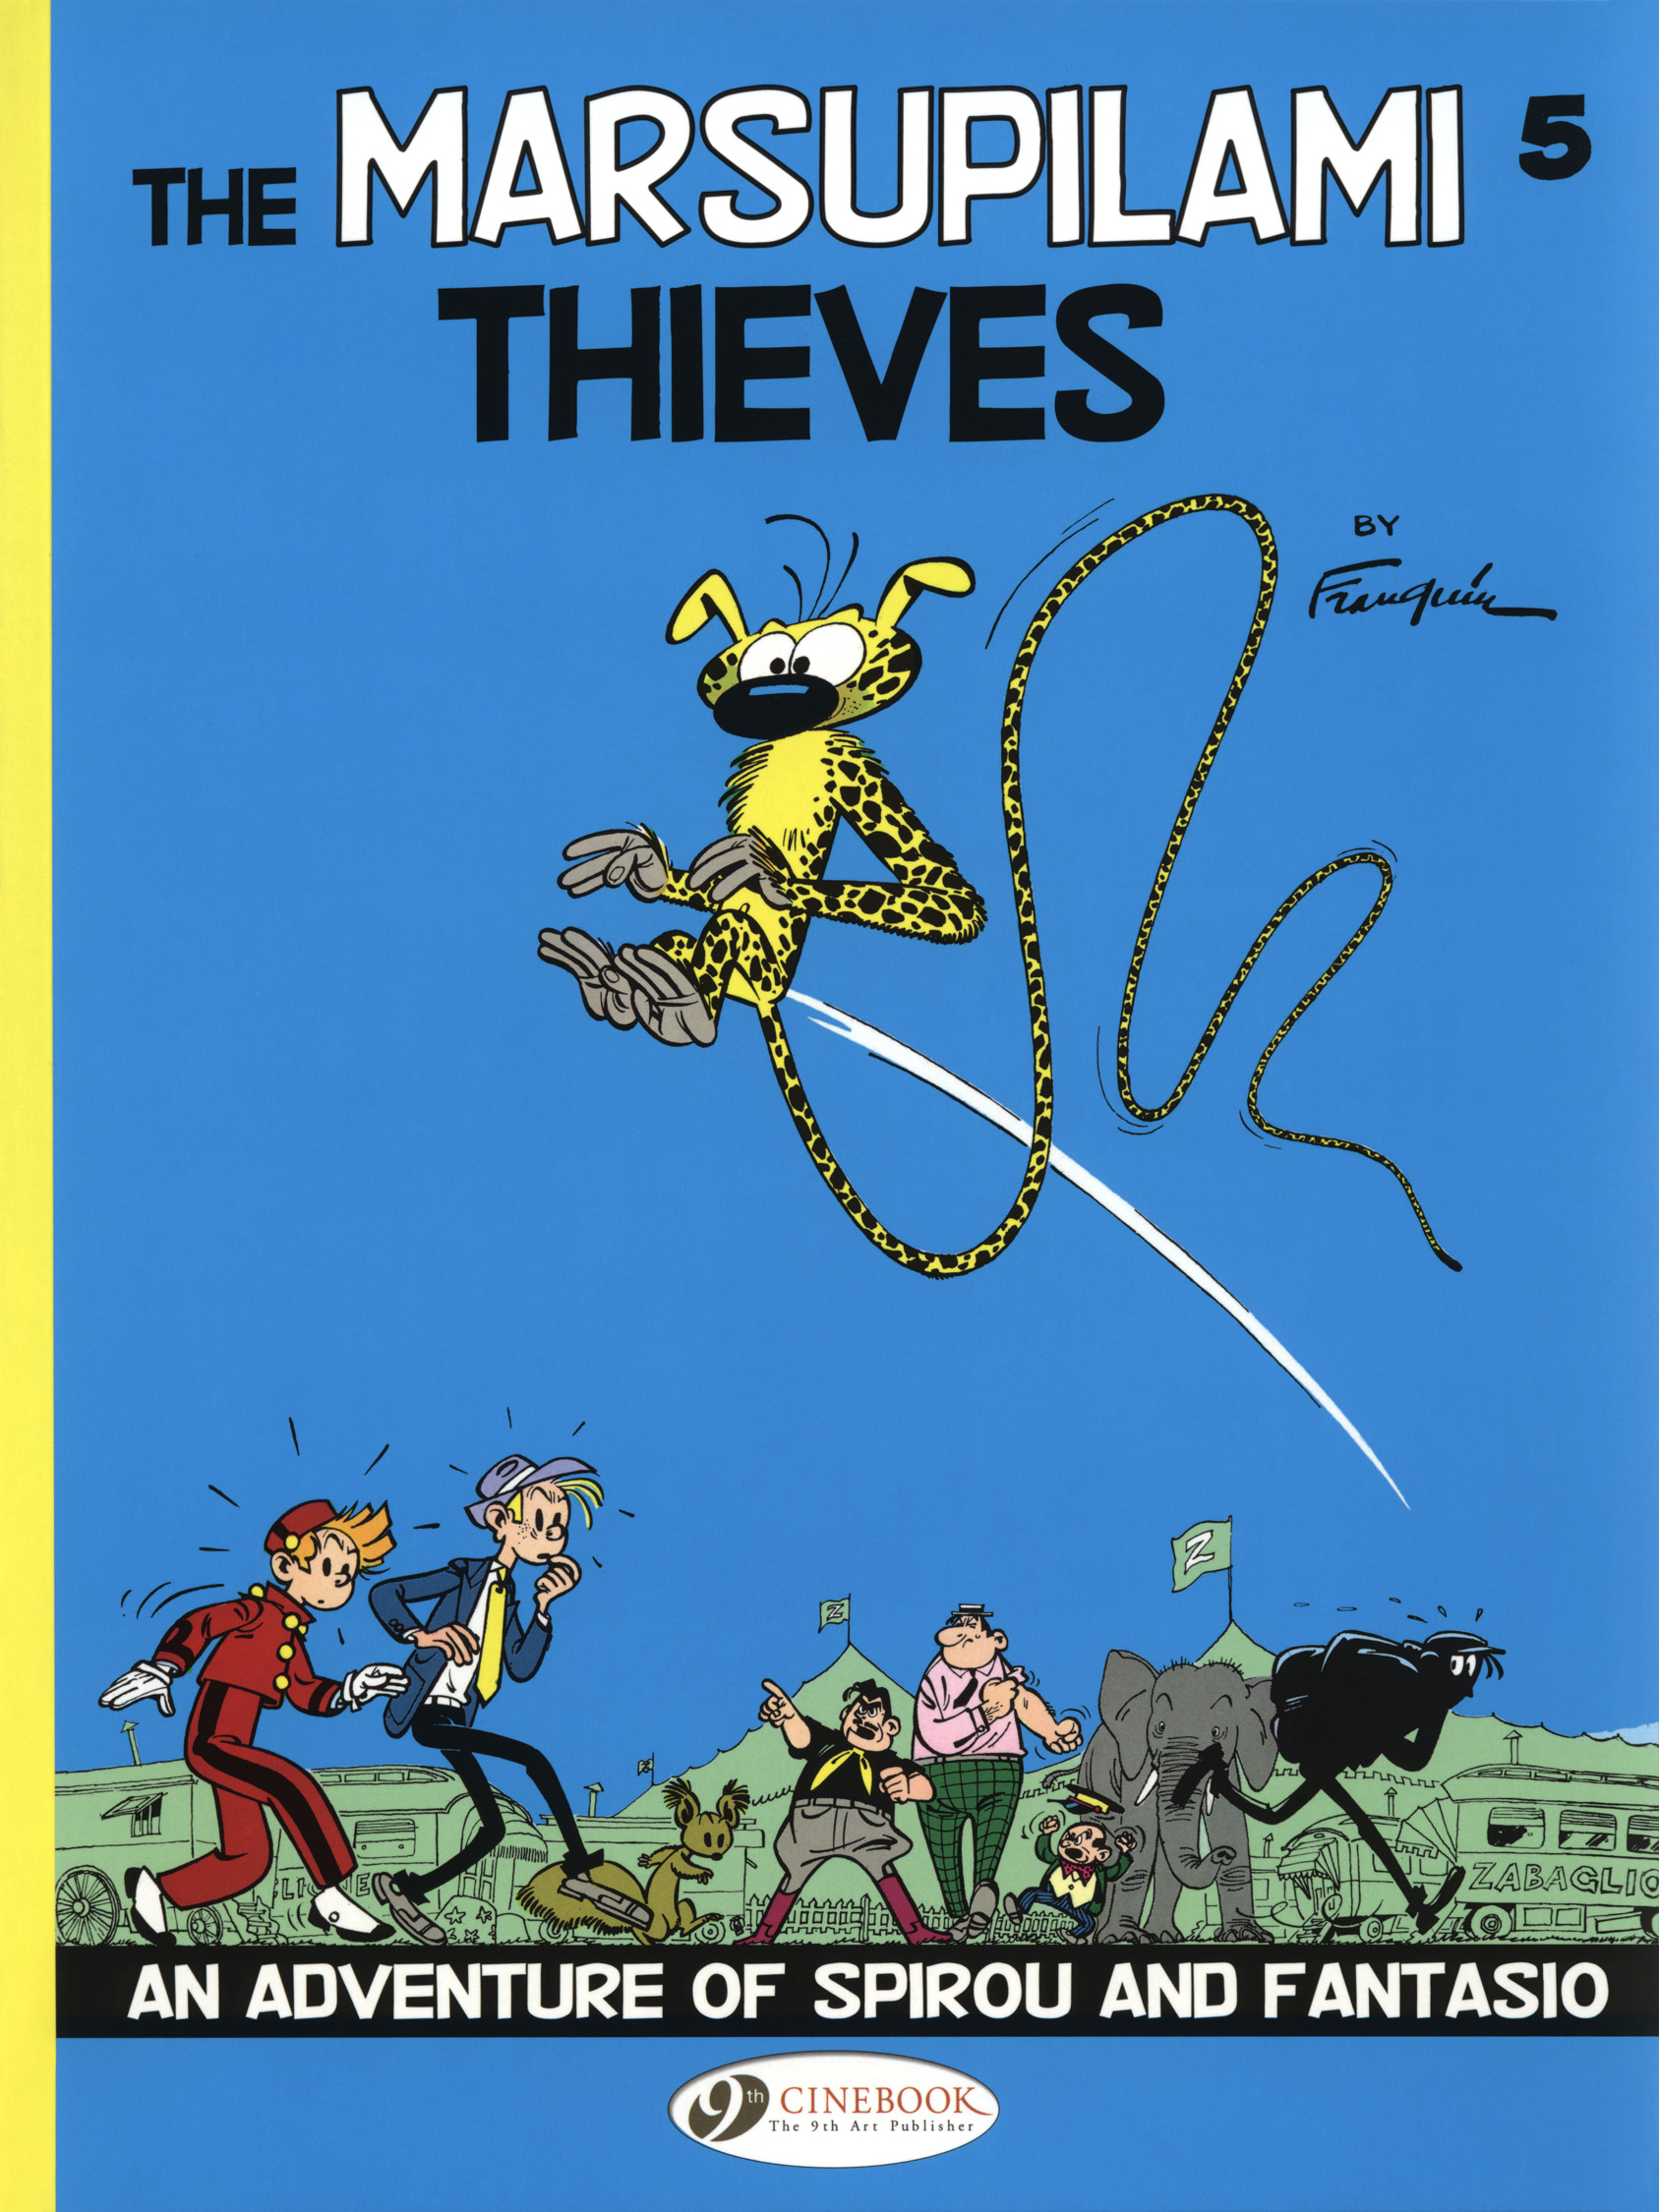 Spirou #5 'The Marsupilami Thieves' by Cinebook (ill. Franquin; (c) Cinebook and the artist)